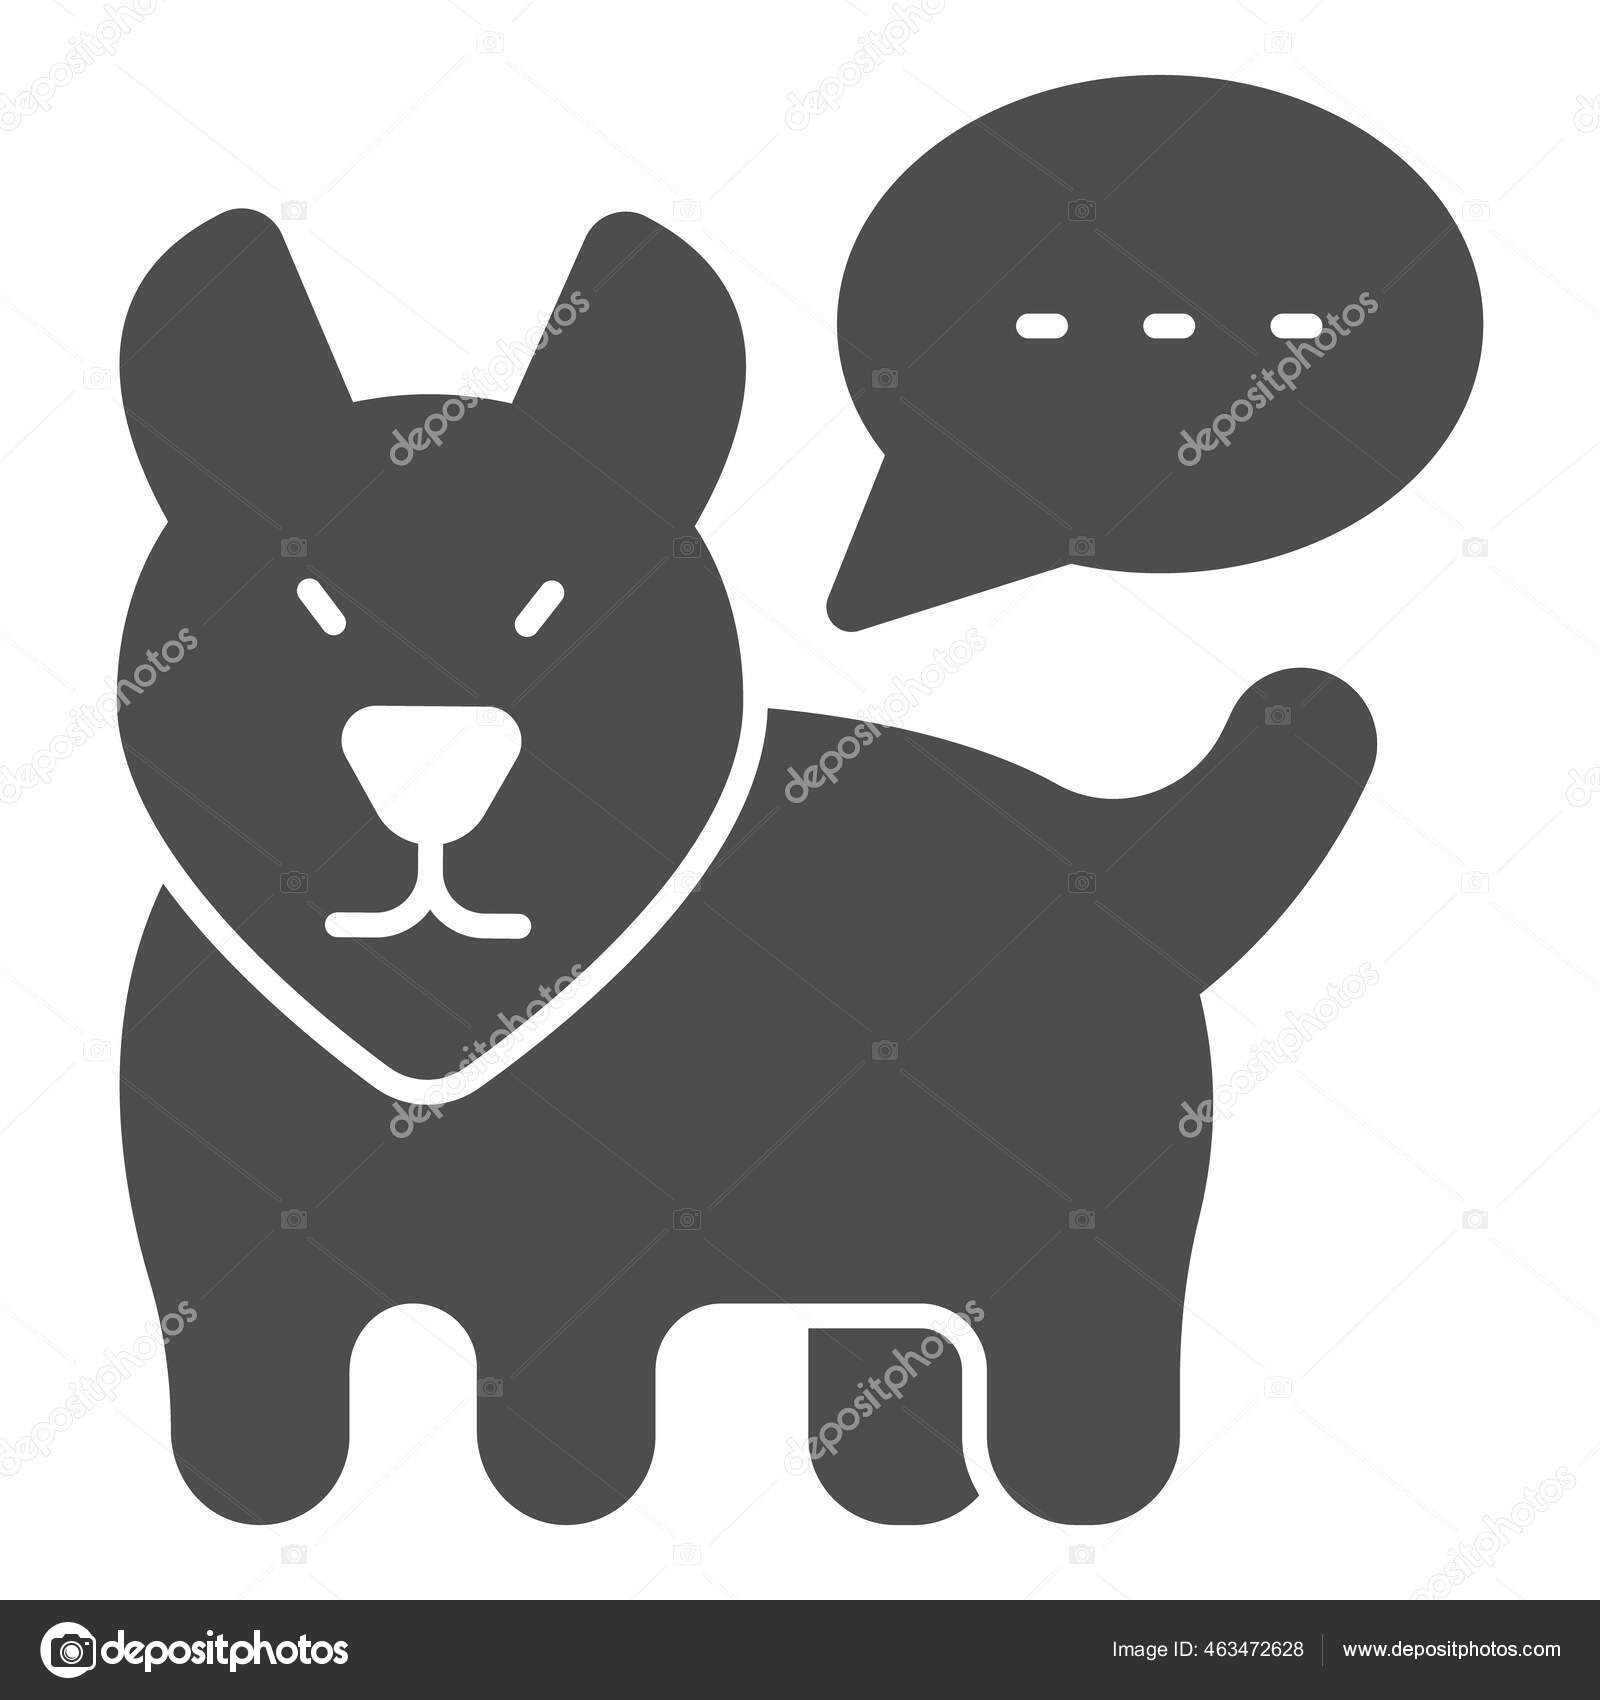 Cats Playing Icon - Download in Glyph Style